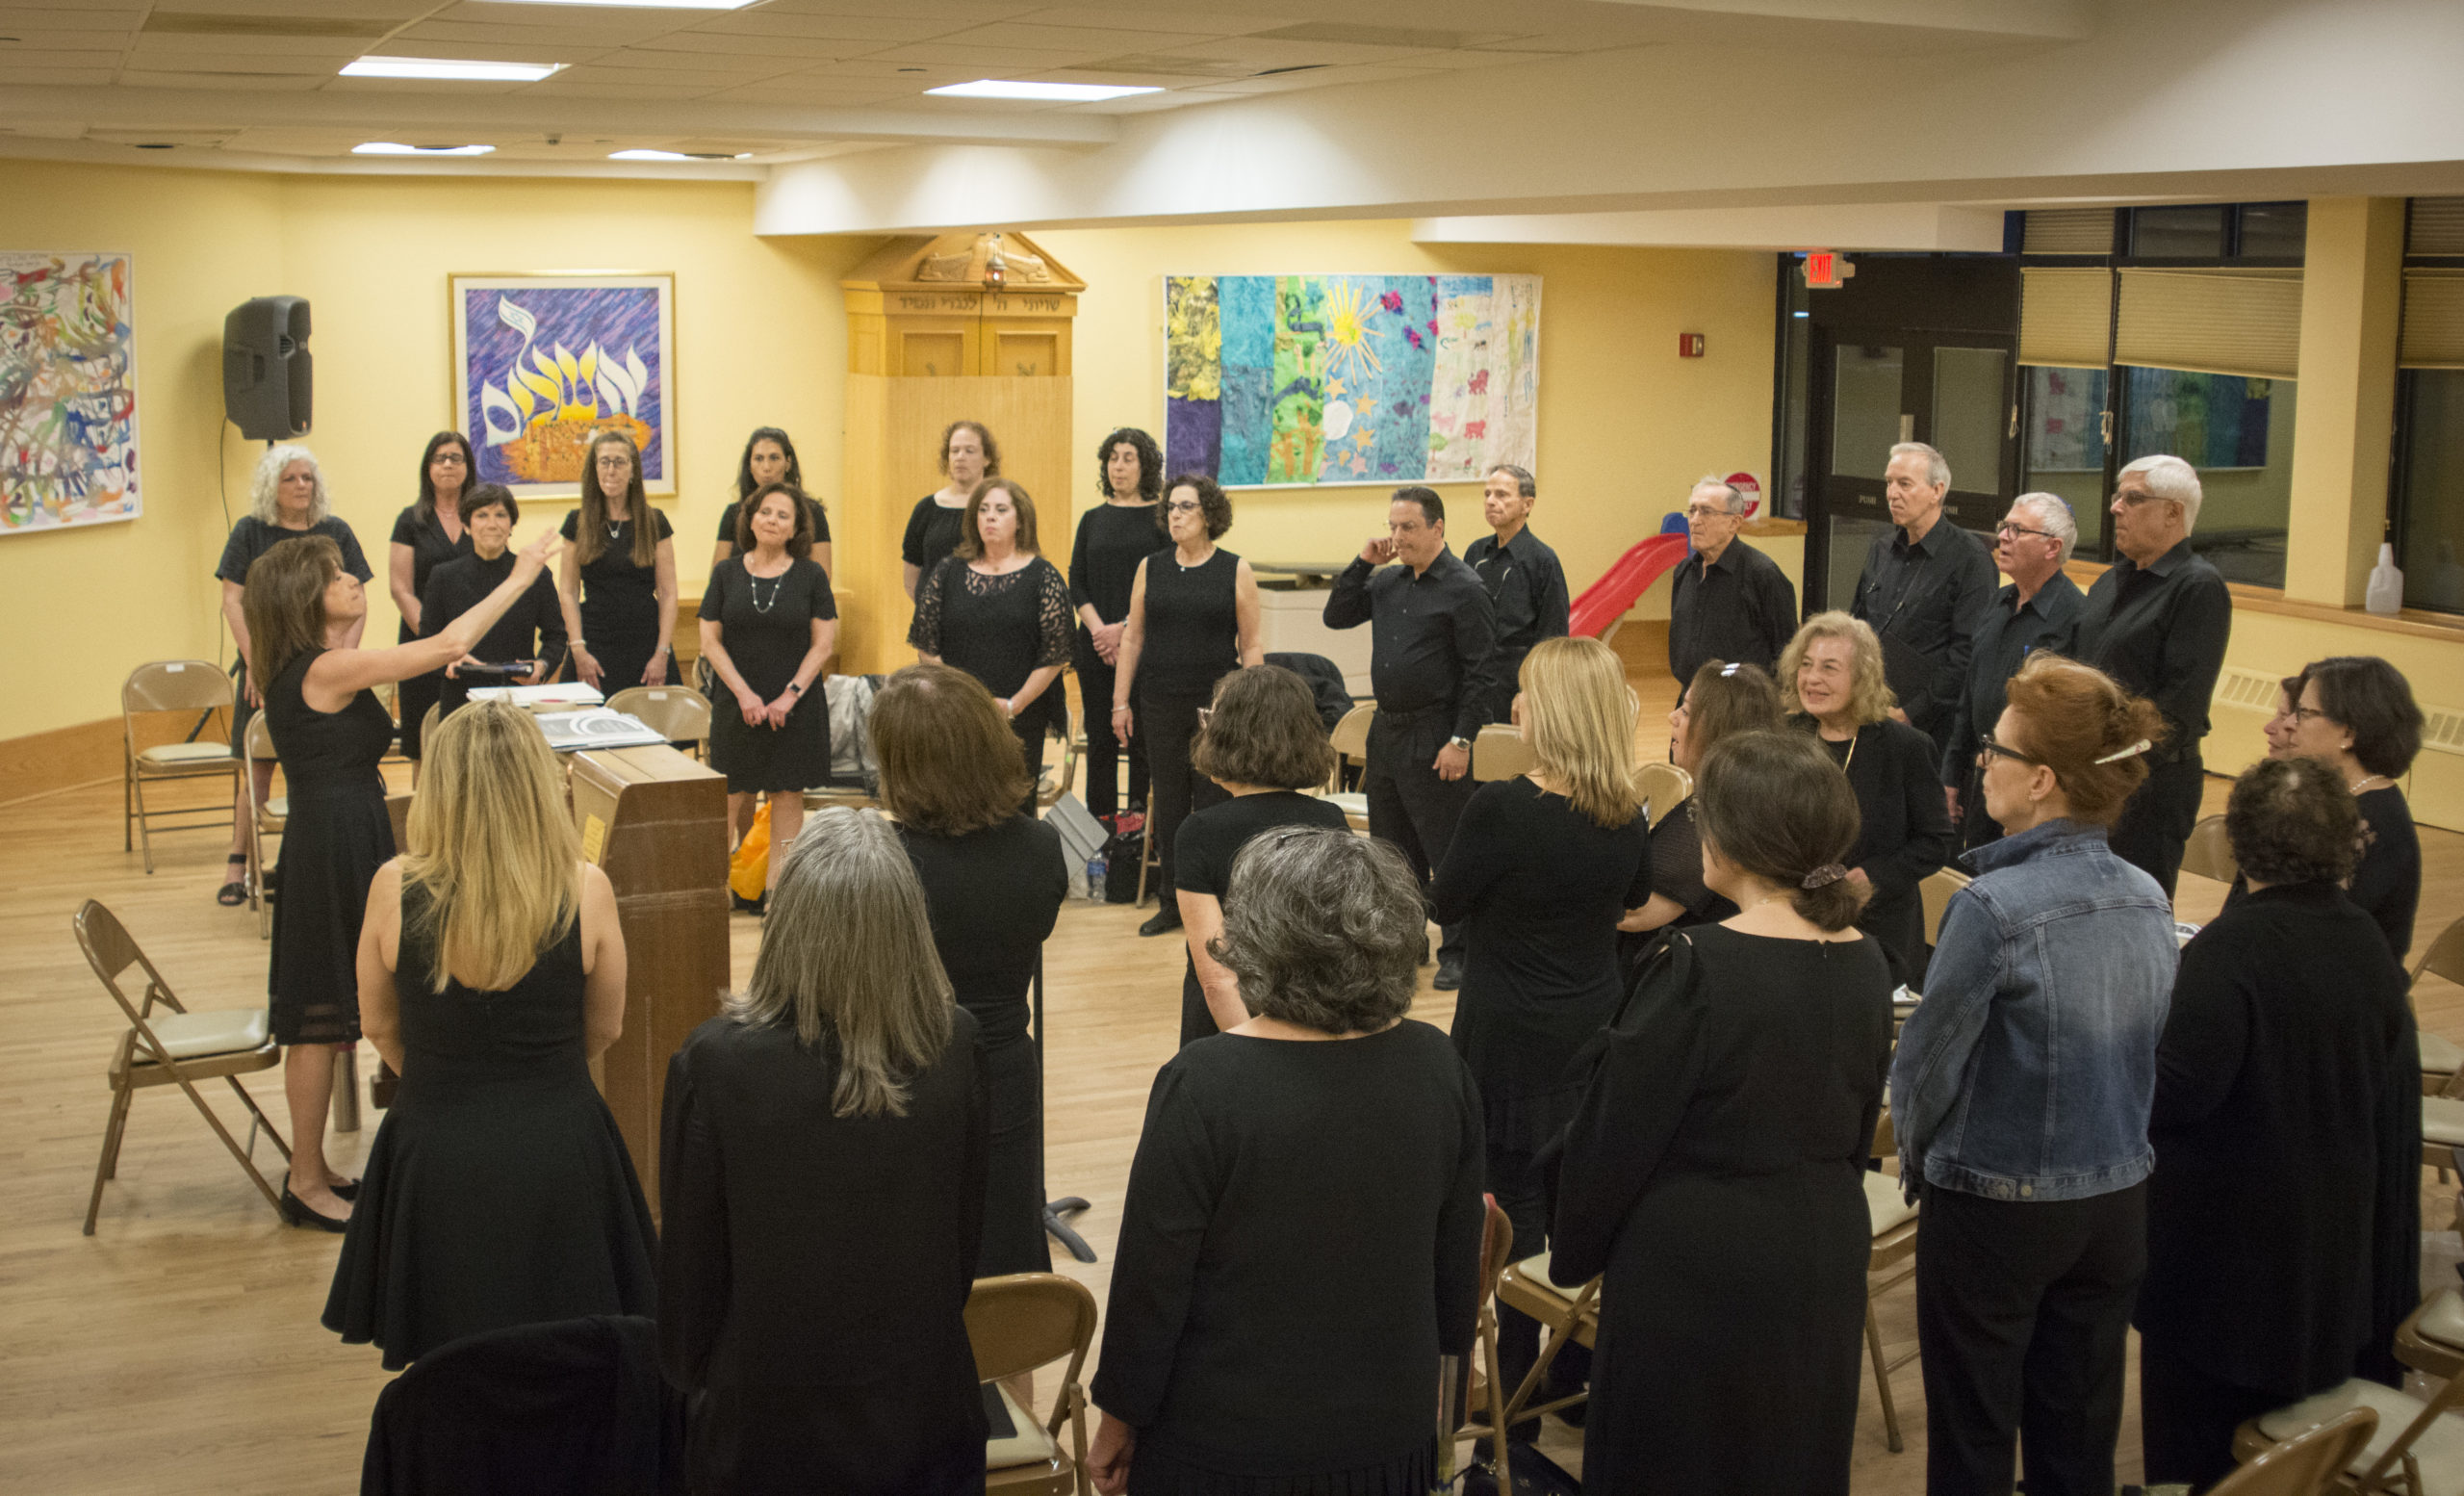 Deborah Tartell, who previously worked as a choral teacher for more than three decades, leads dozens of people through rehearsal. (Photo by Janelle Clausen)